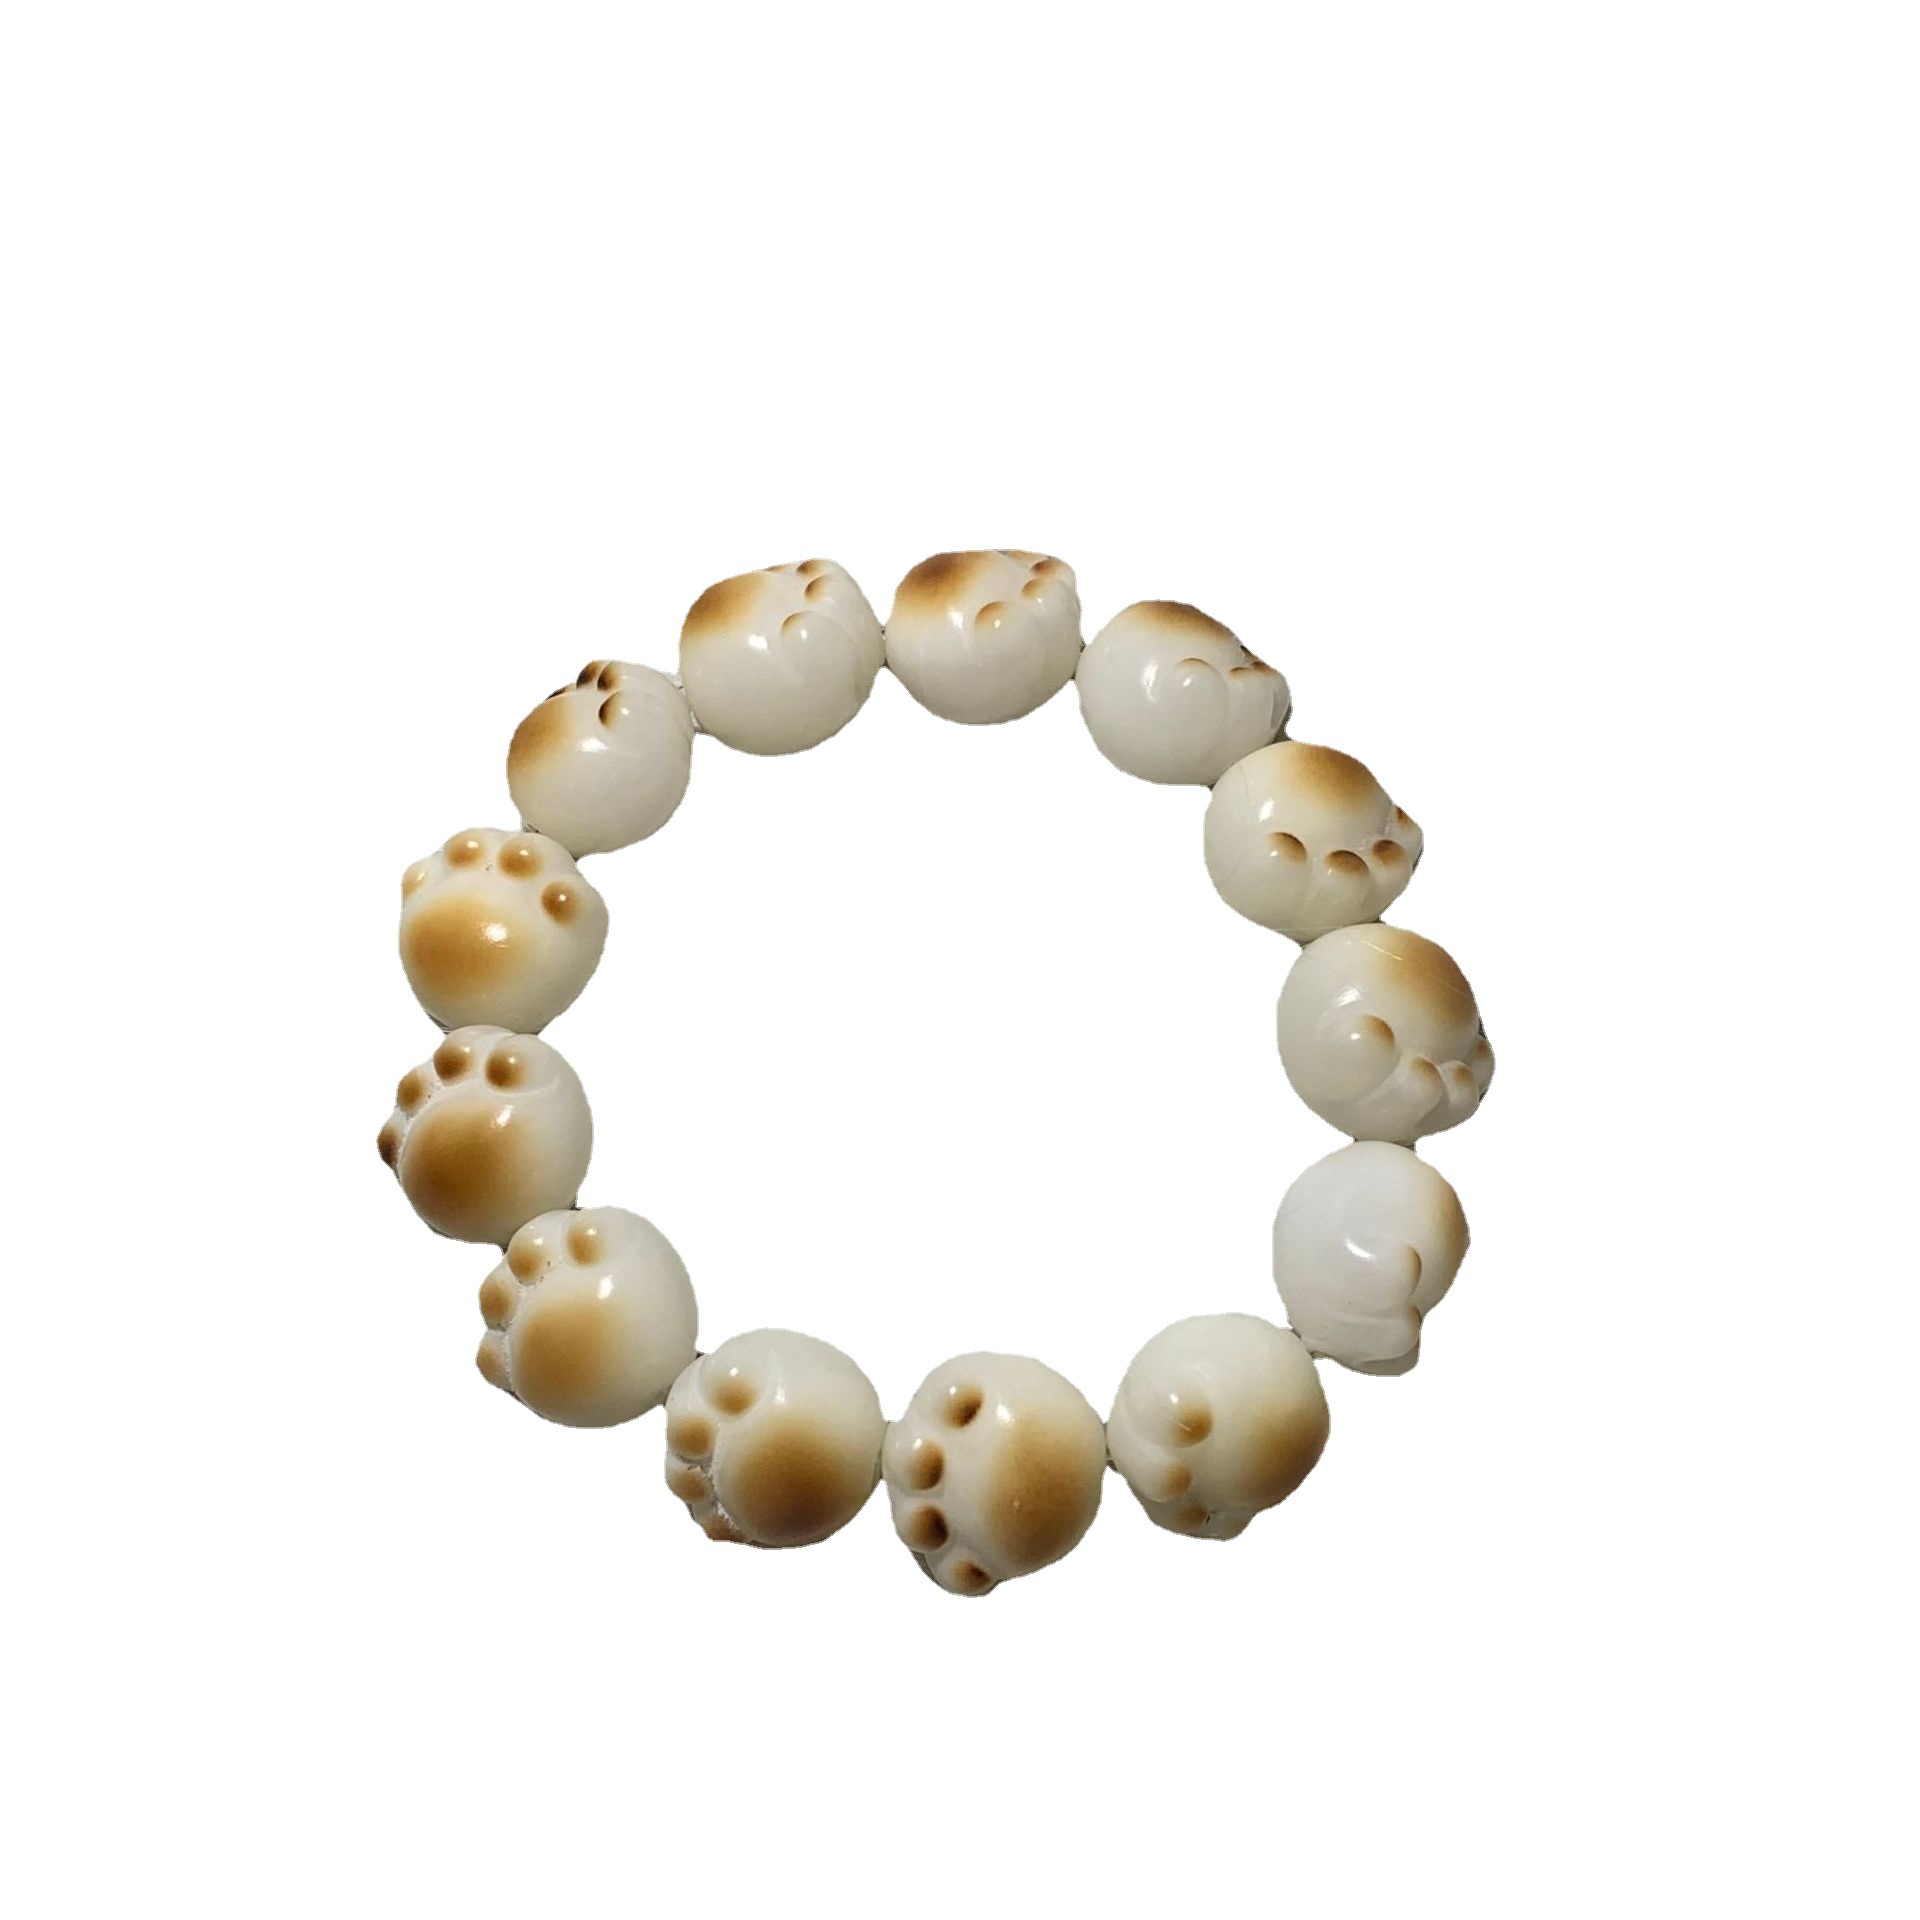 Natural Bodhi Bead Charcoal Grilled Cat's Paw White Jade Bodhi Carved Cat's Paw Bracelet